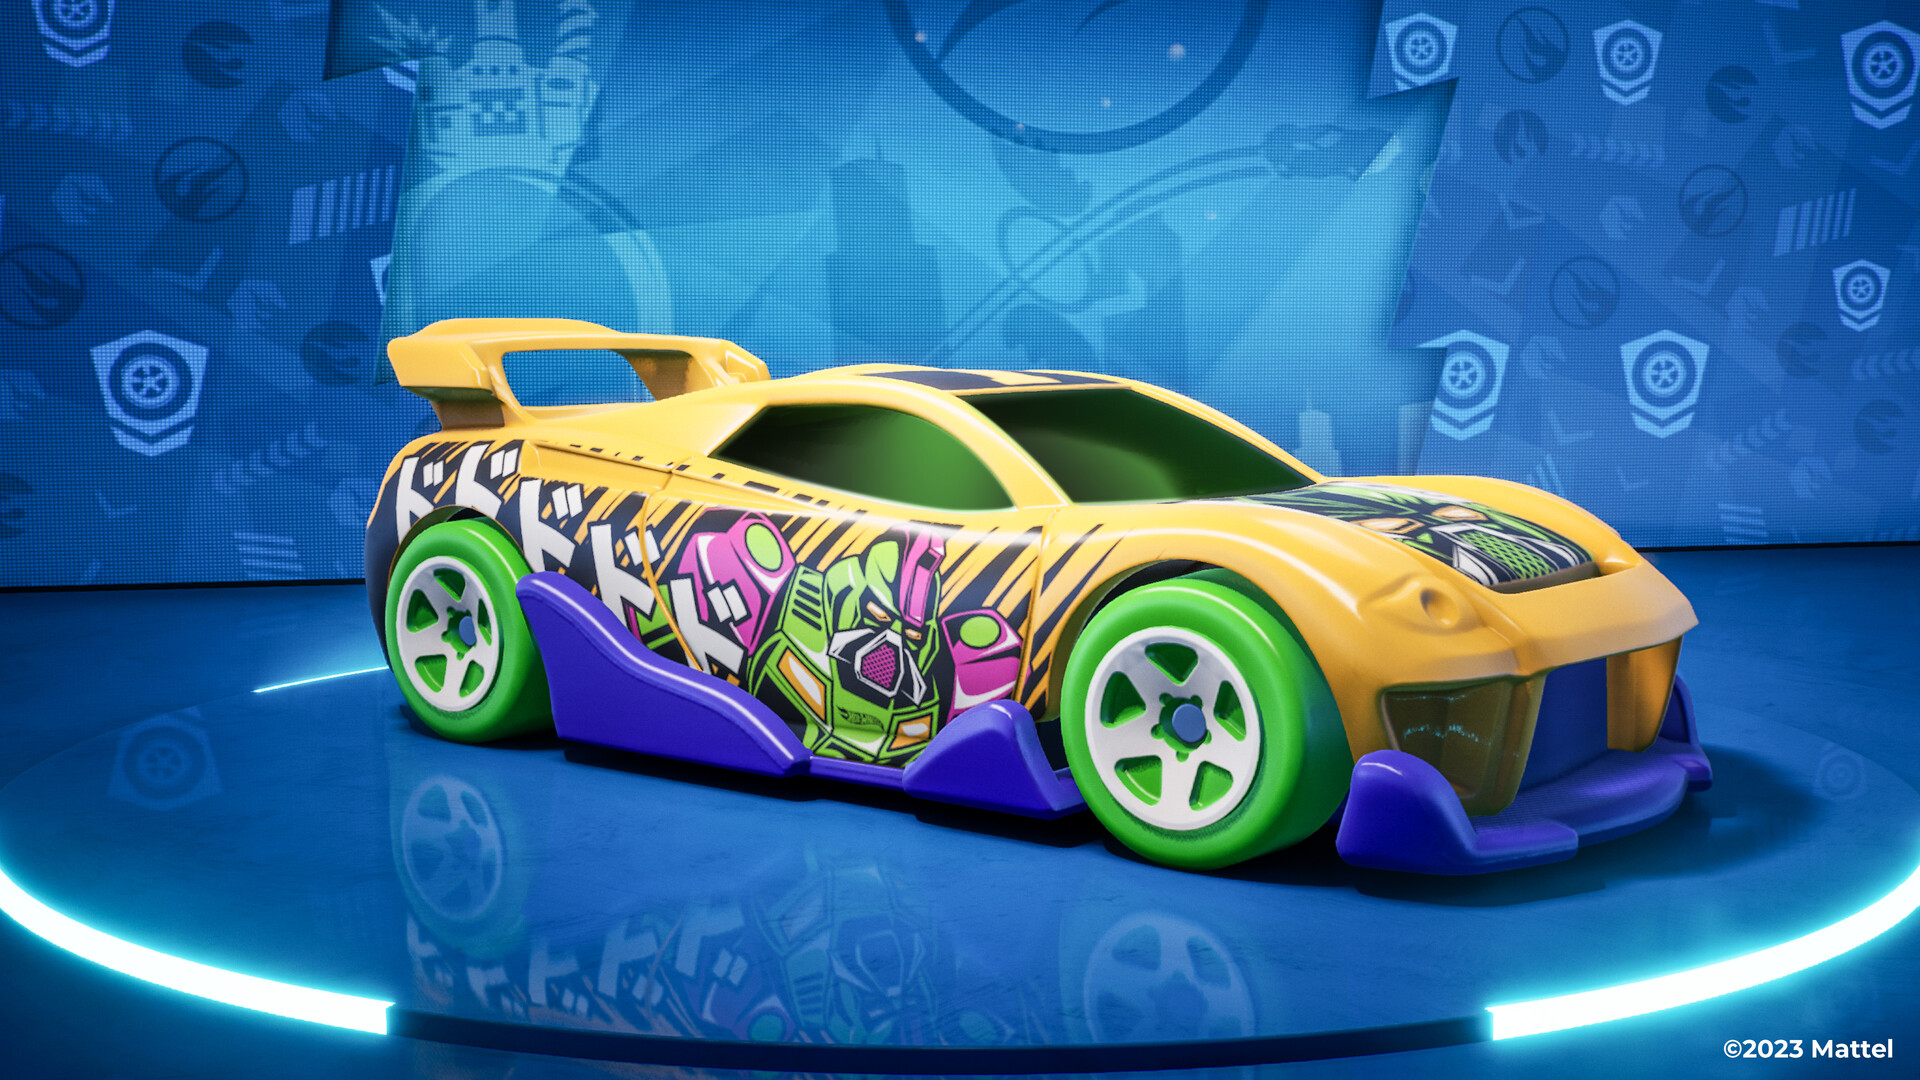 Hot Wheels Unleashed 2 Turbocharged PlayStation 5 Account Pixelpuffin.net Activation Link